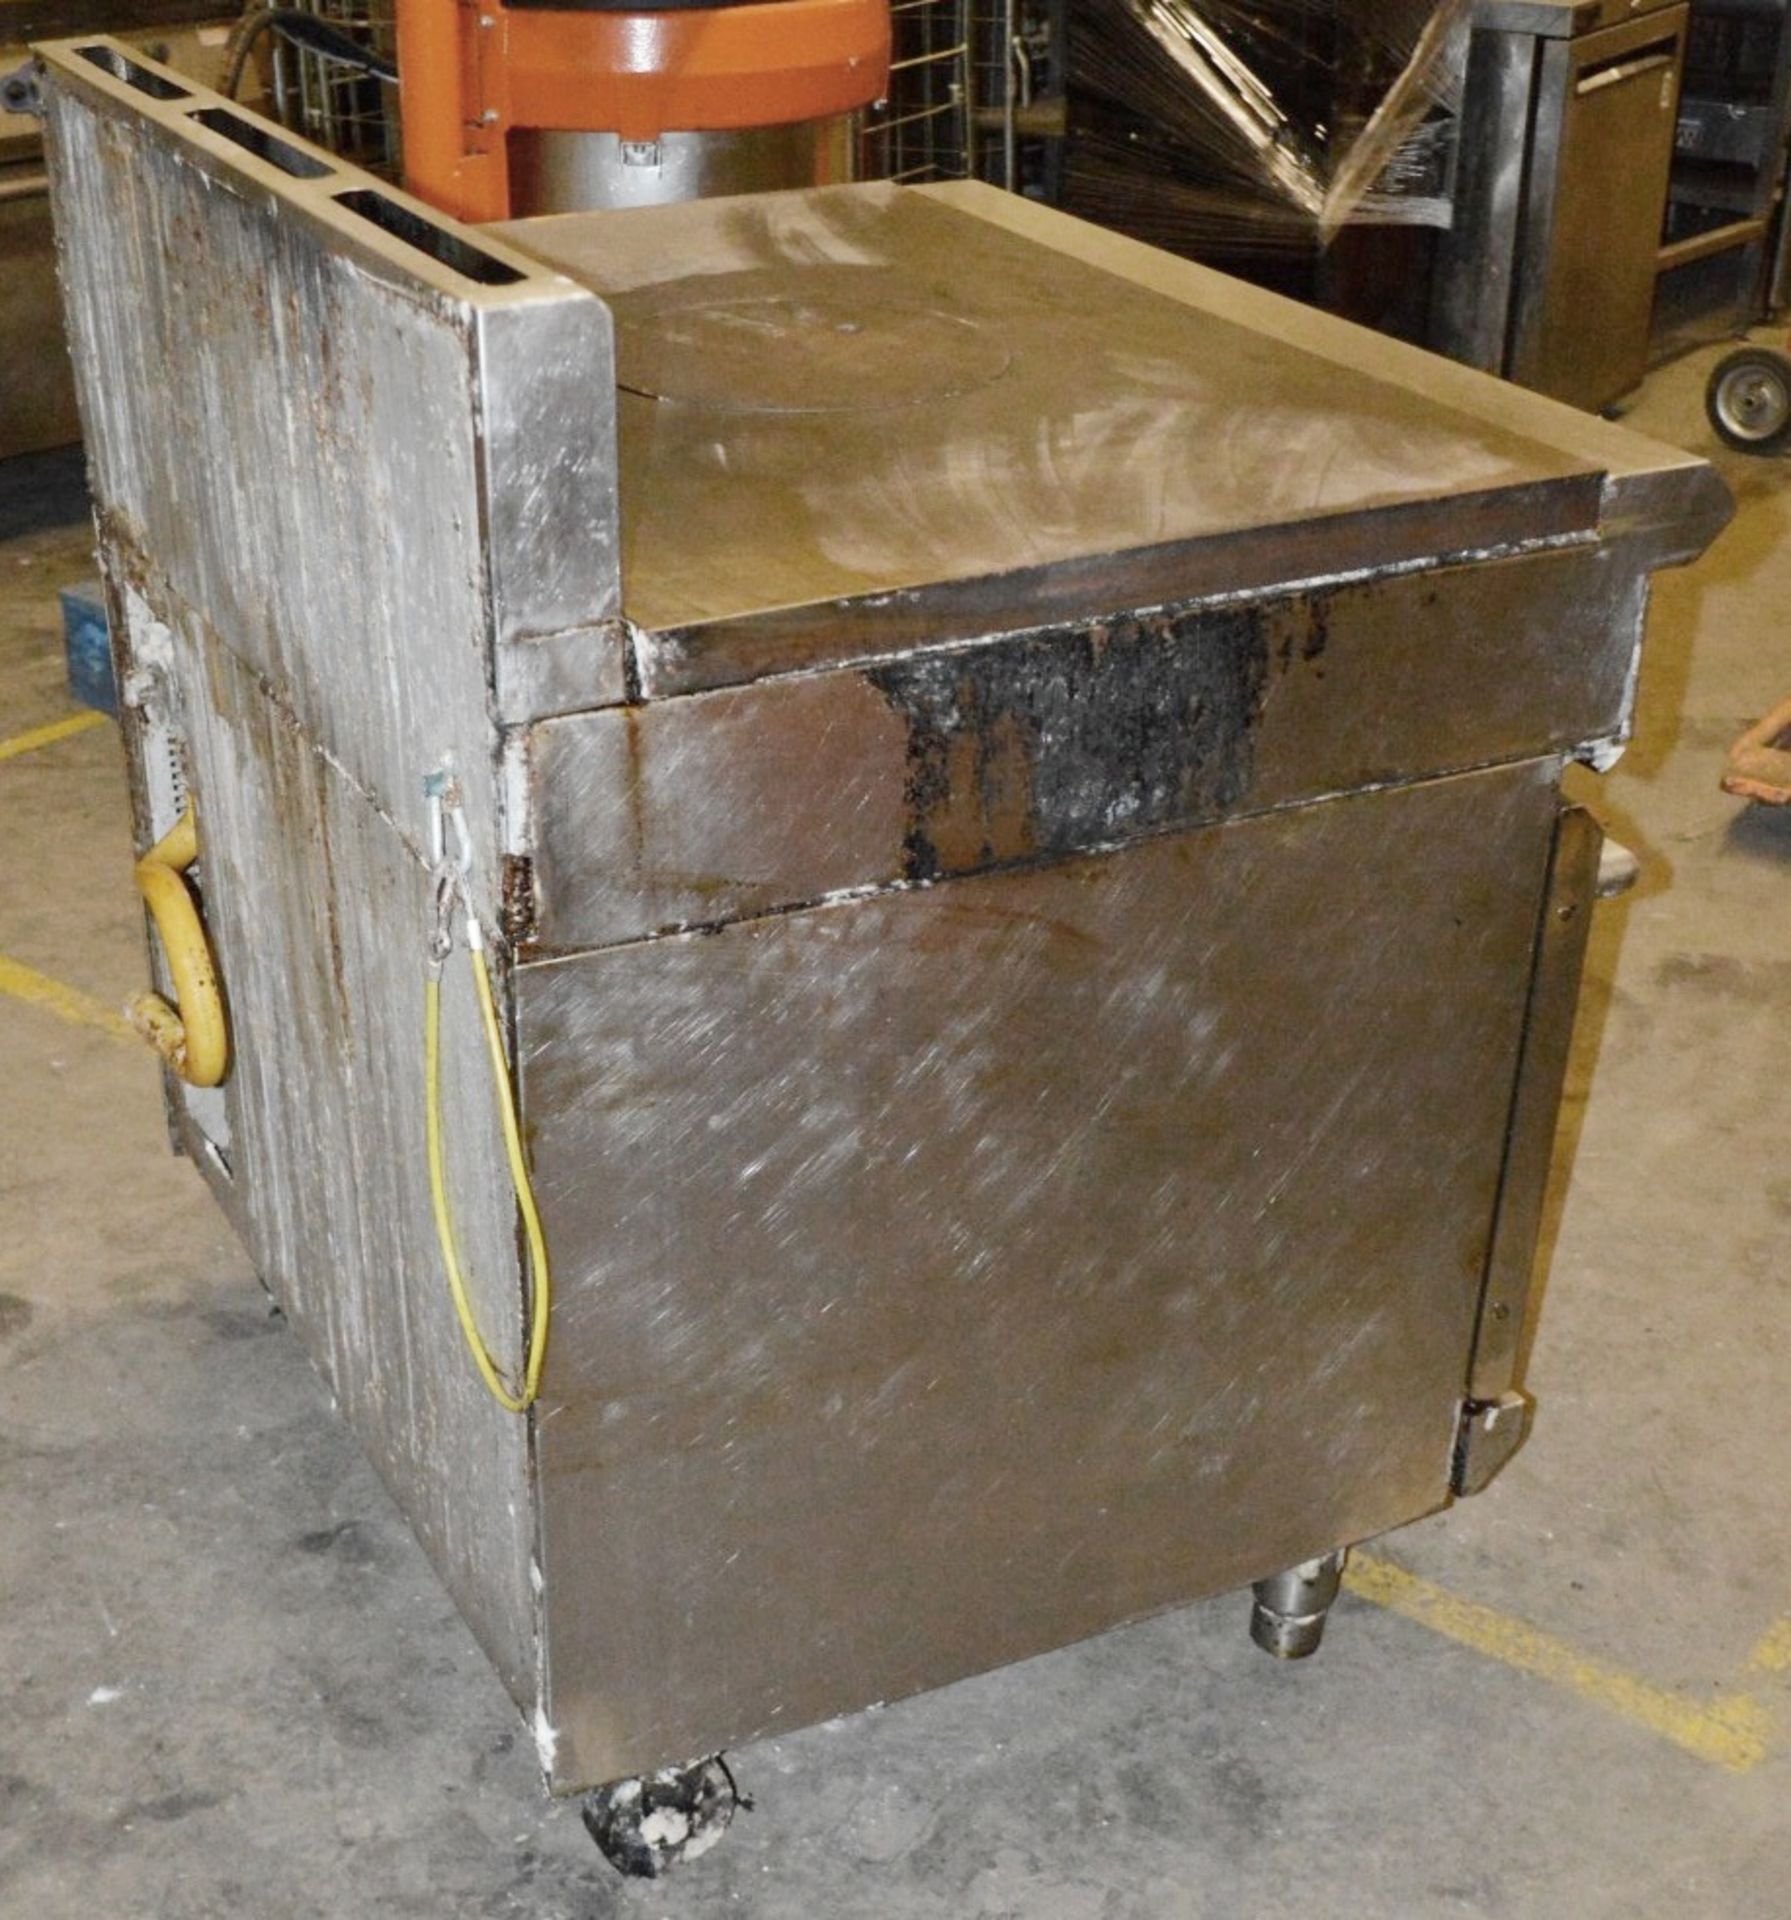 1 x Commercial Natural Gas Solid Top Range In Stainless Steel - Ref: J1566 - Low Start, No Reserve - Image 5 of 5